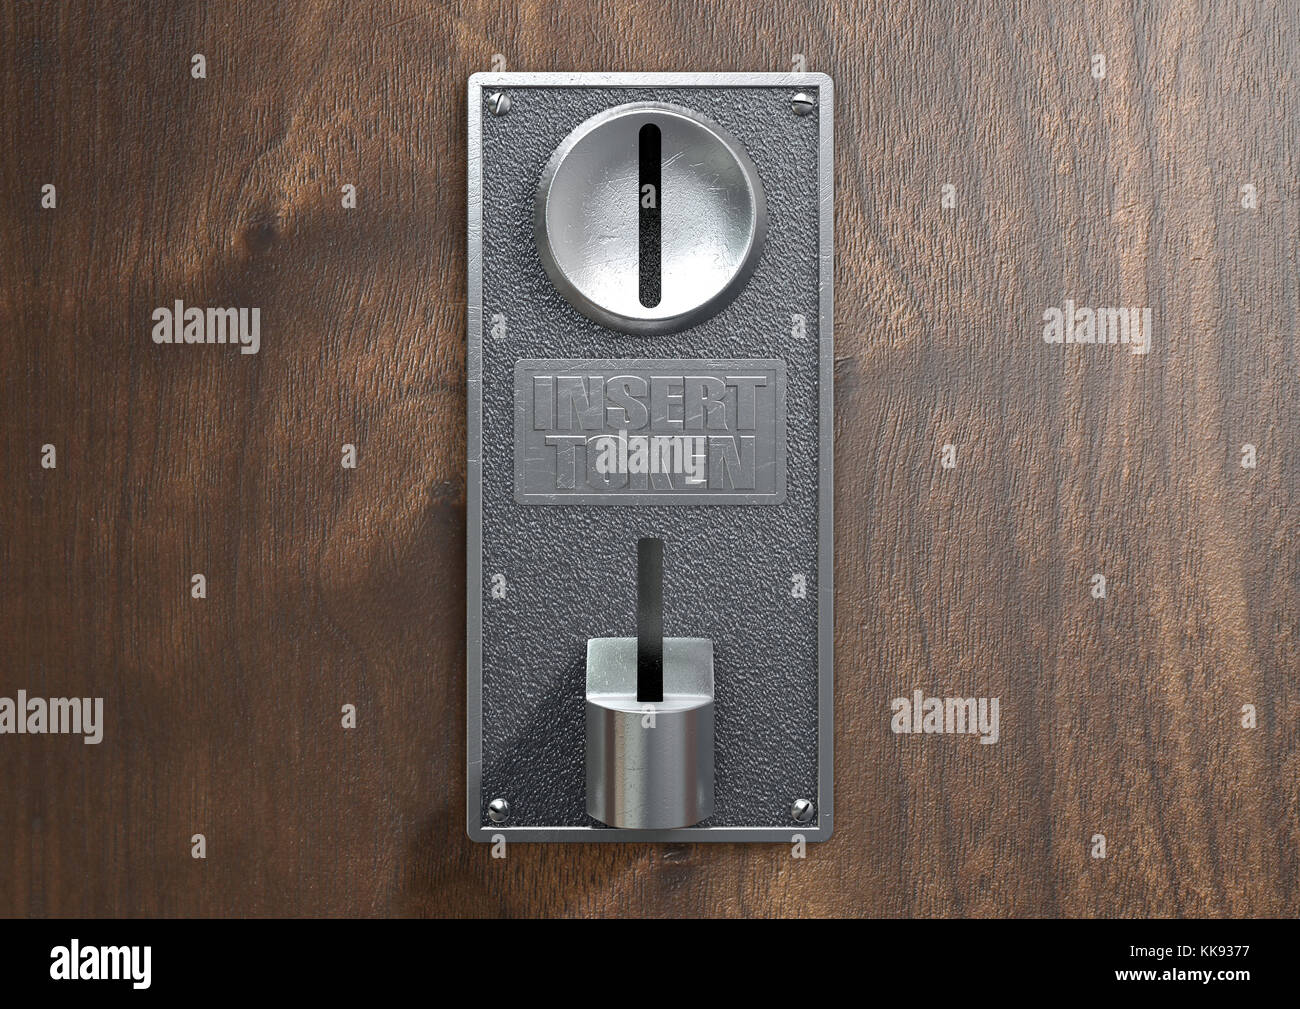 A vintage metal coin receptacle slot panel from a coin operated machine with entry and exit slots mounted on a wooden surface Stock Photo